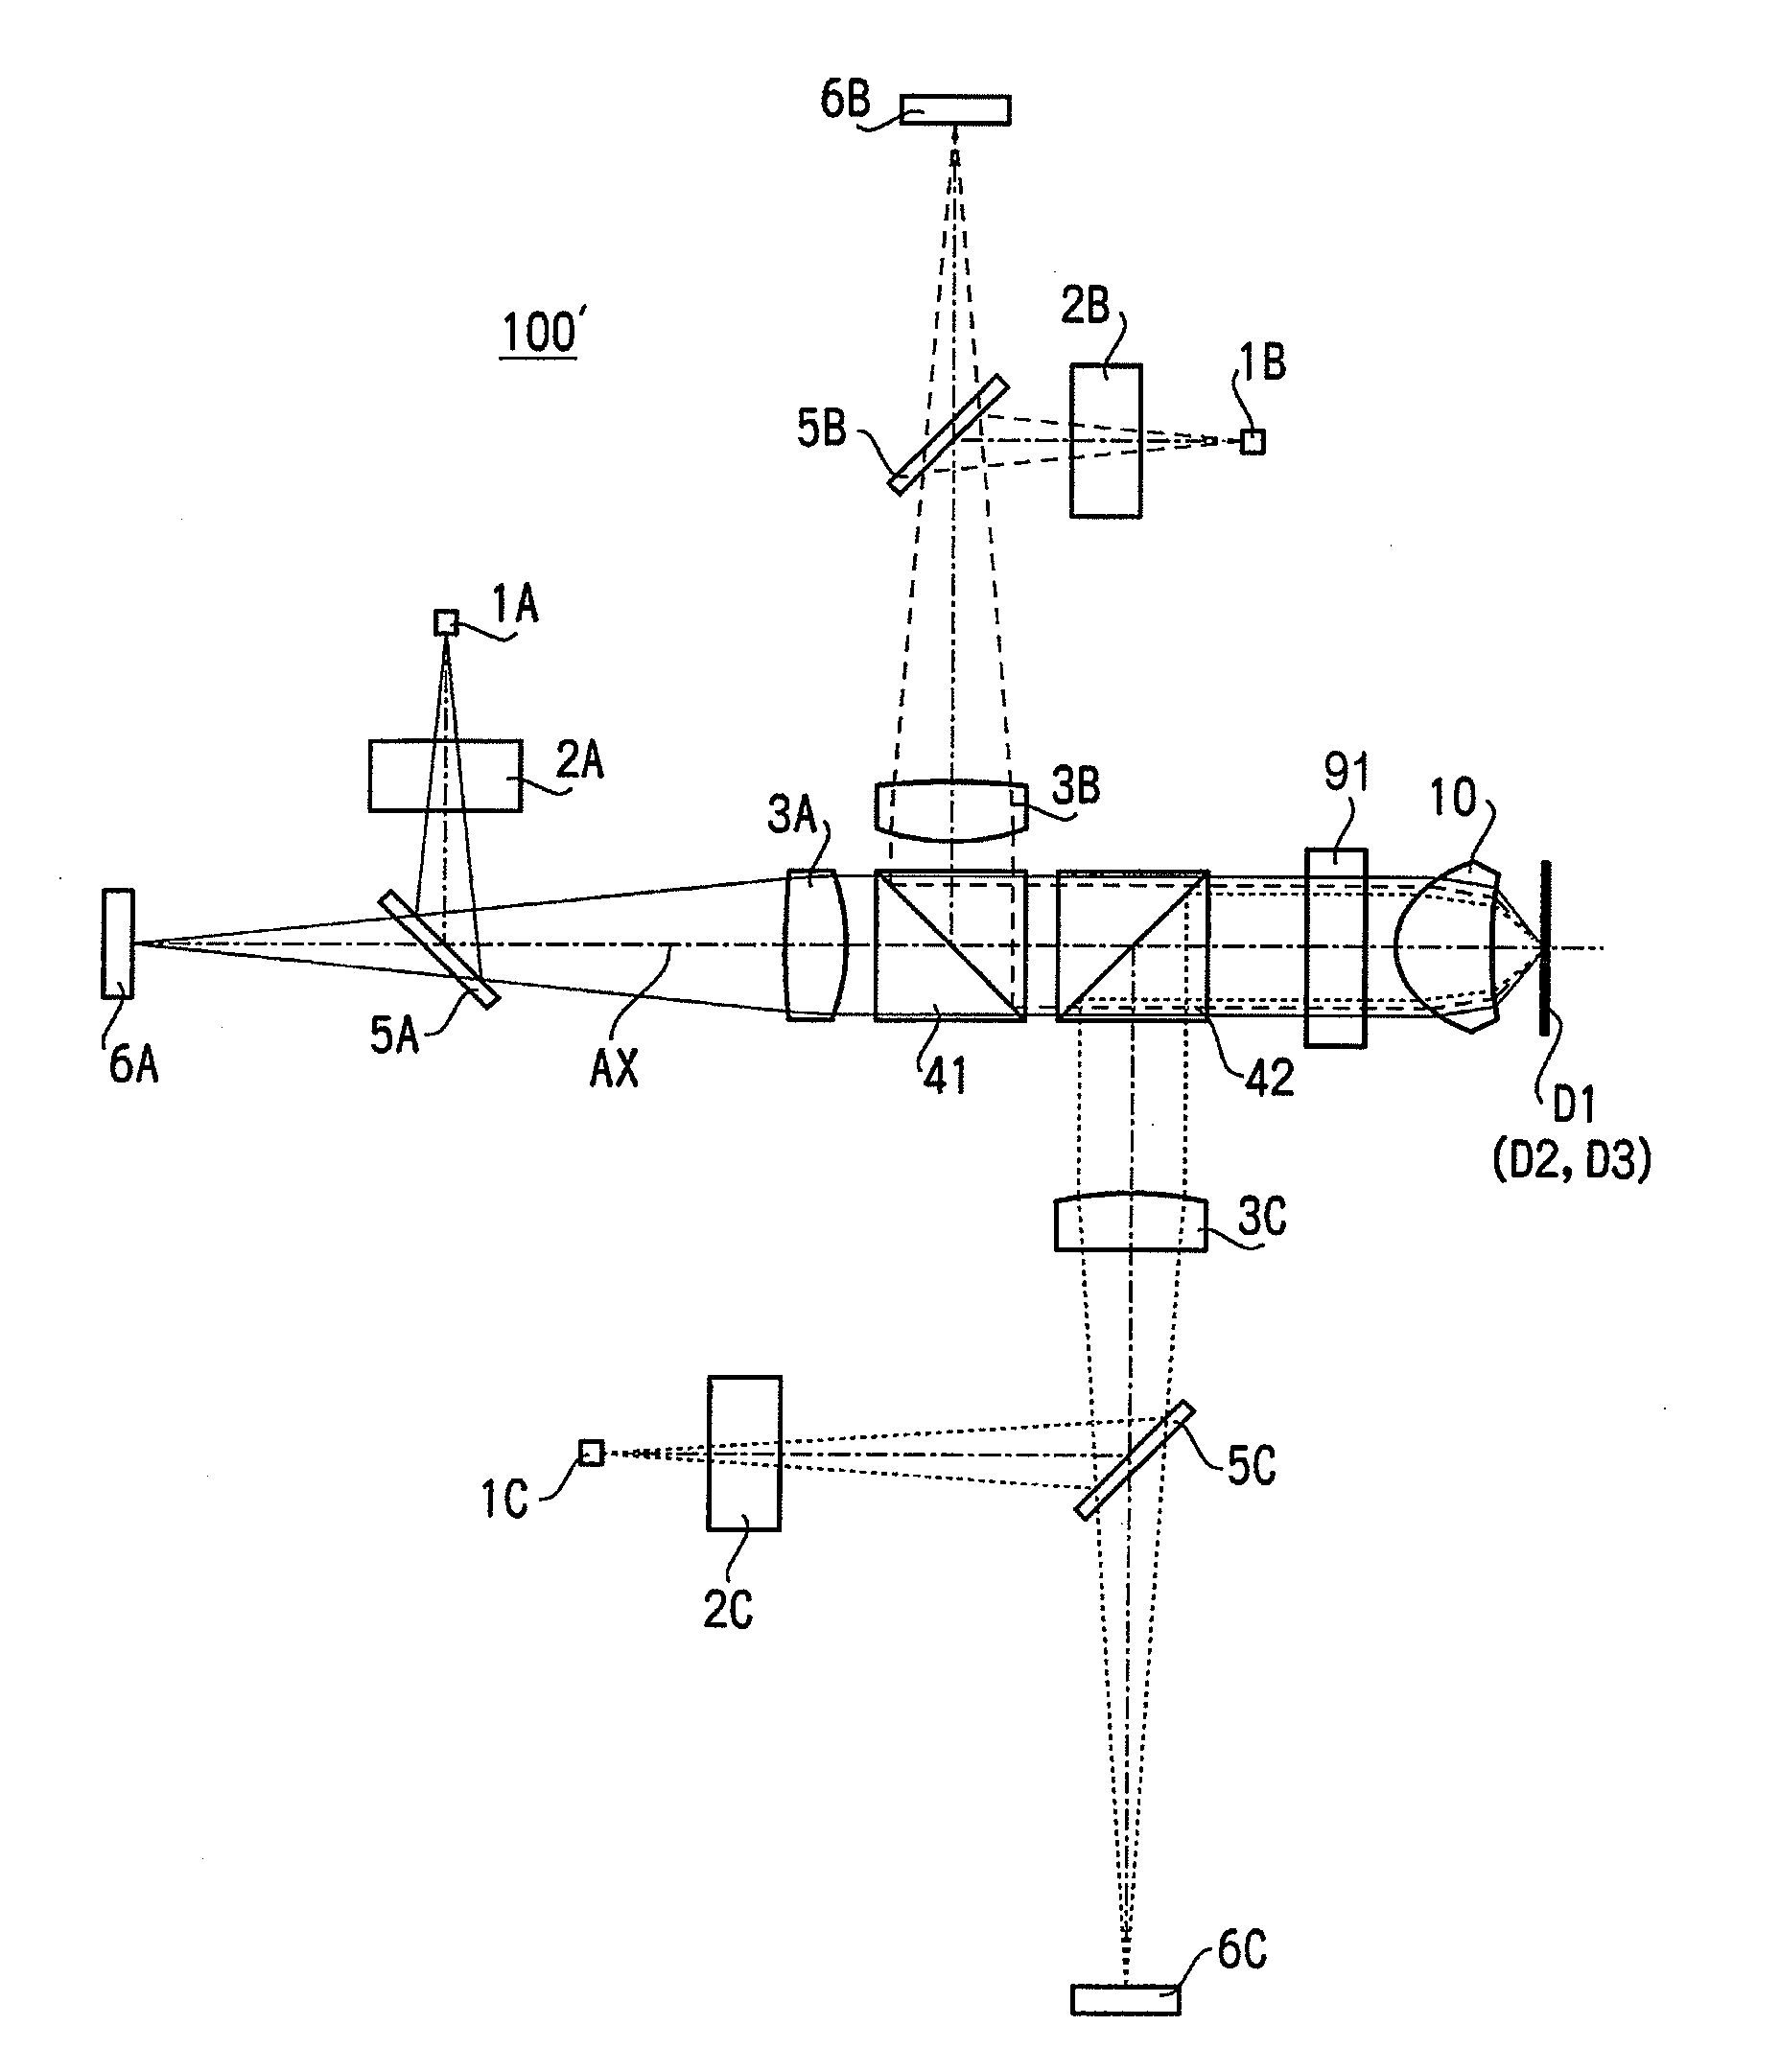 Optical information recording/reproducing apparatus and objective optical system for the same